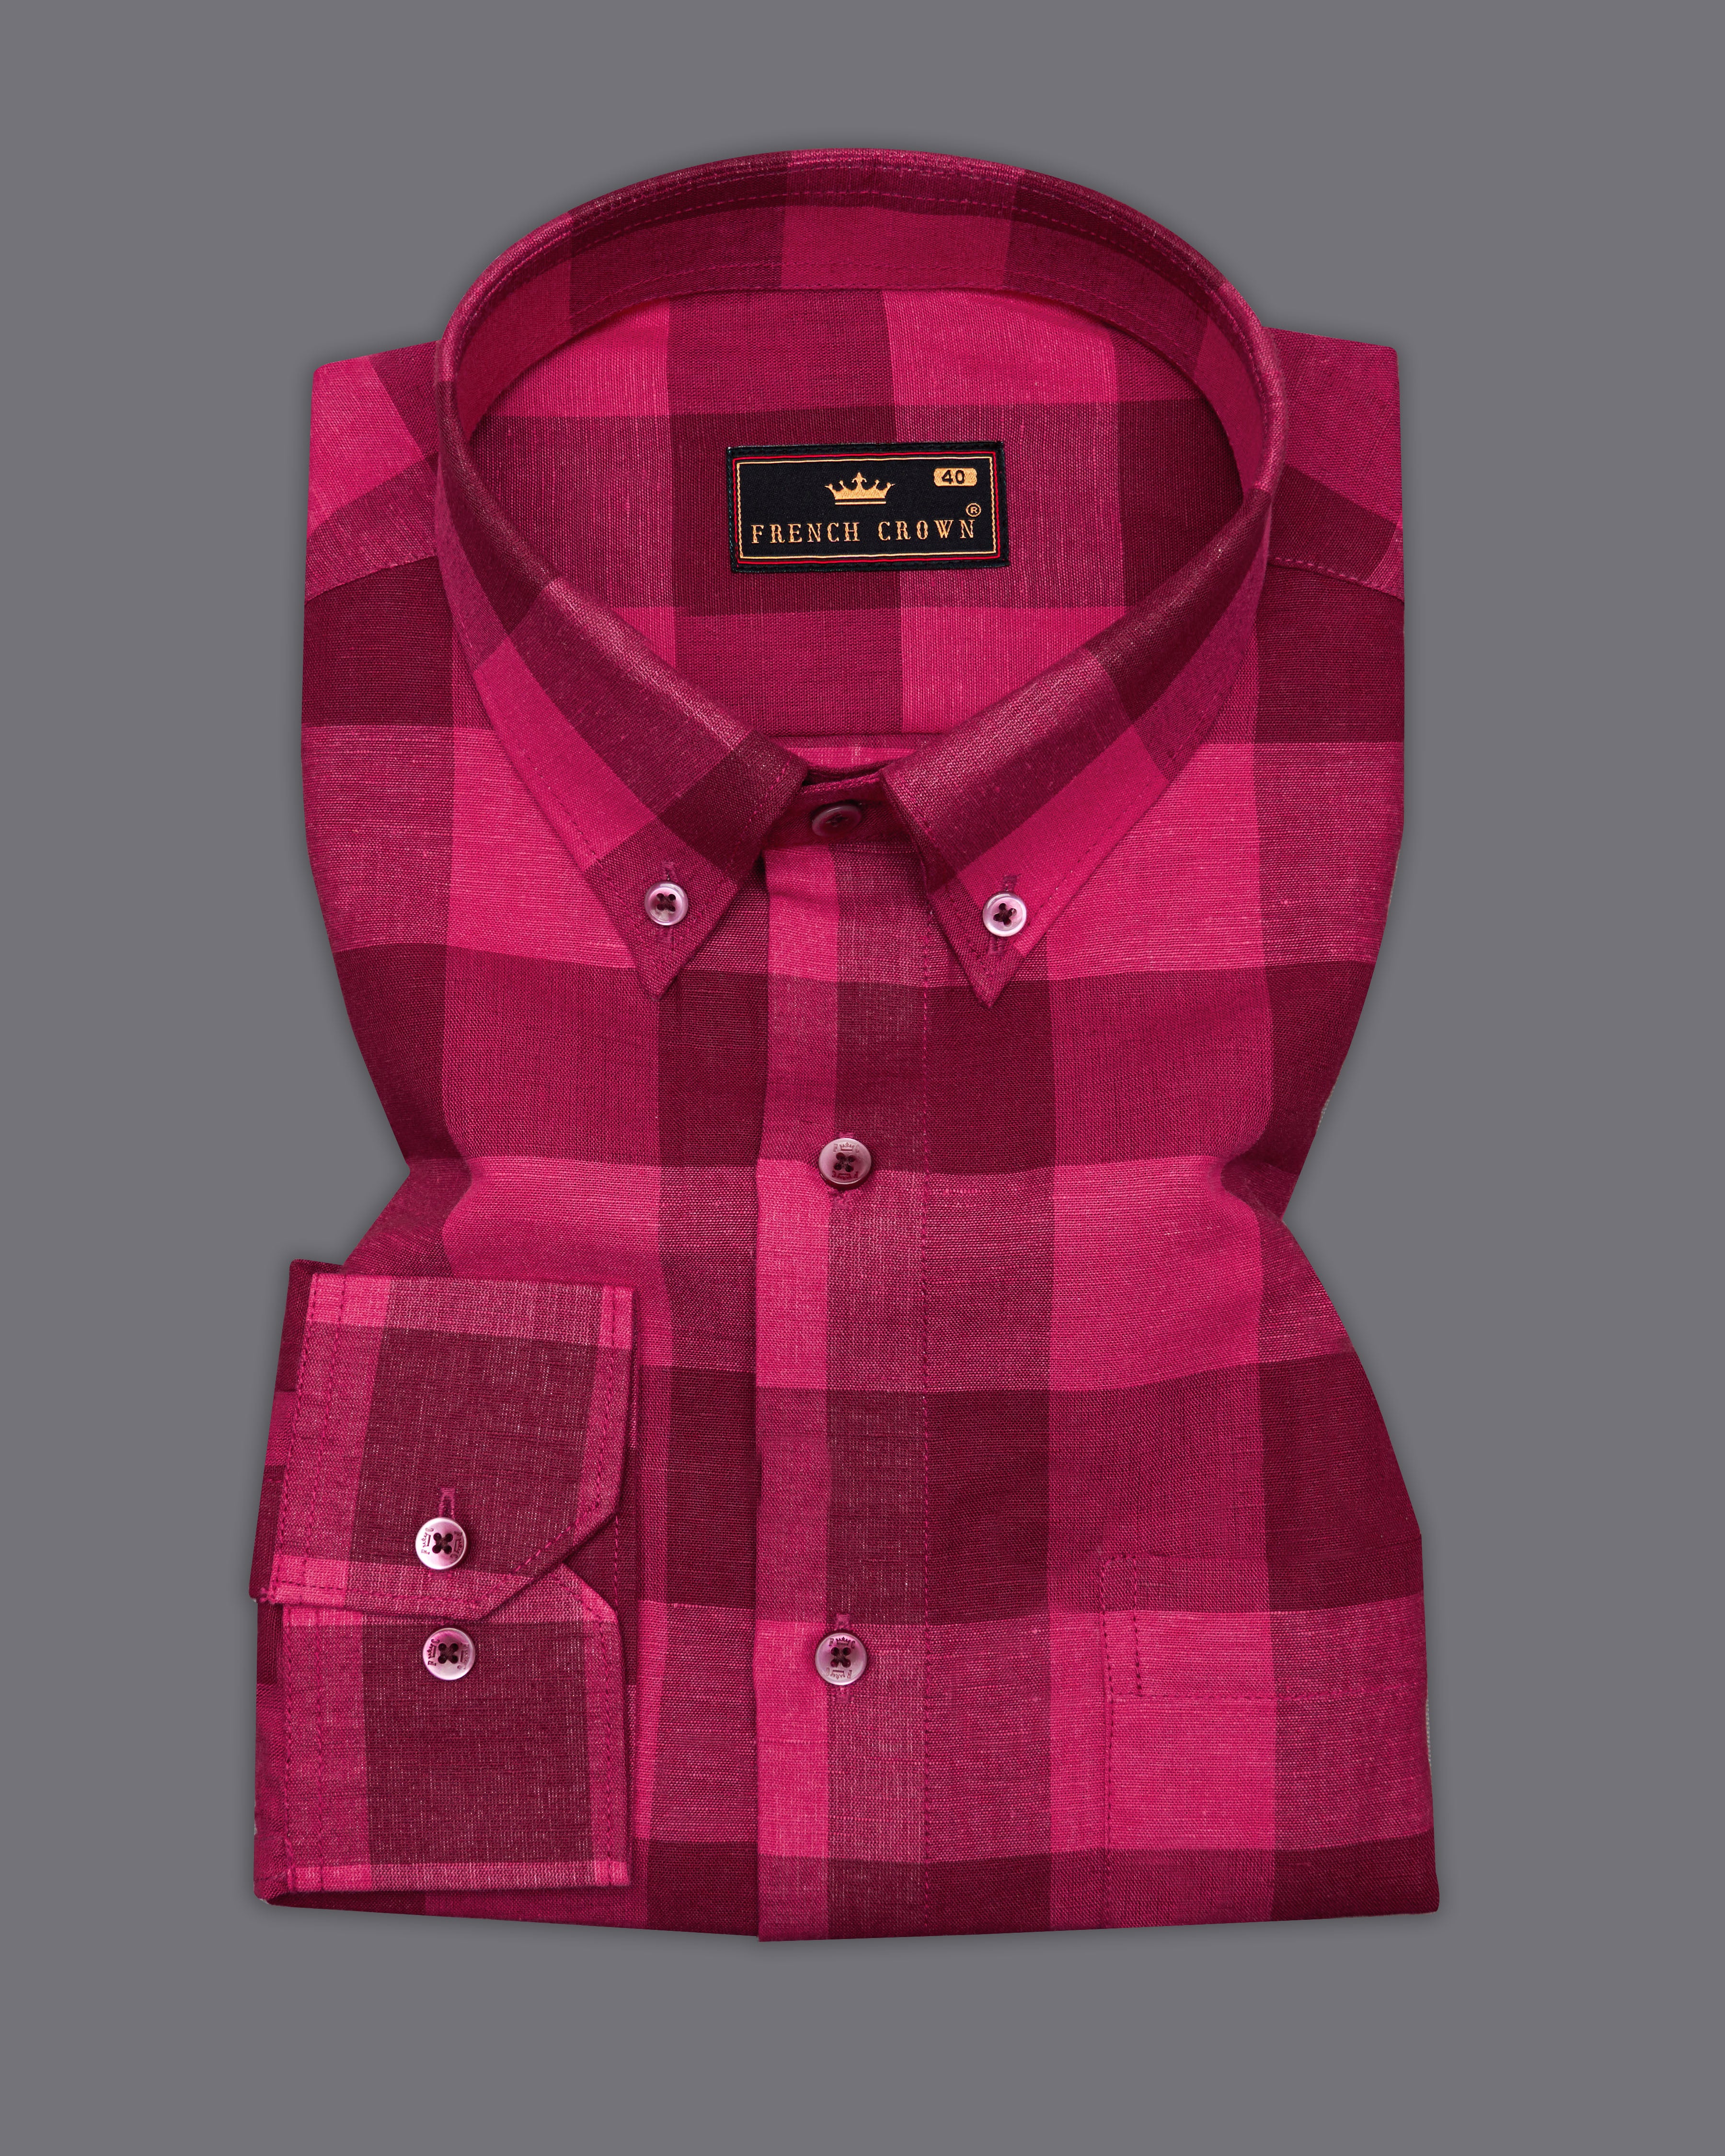 Scarlet Maroon with Hibiscus Pink Luxurious Linen Shirt 9665-BD-MN-38,9665-BD-MN-H-38,9665-BD-MN-39,9665-BD-MN-H-39,9665-BD-MN-40,9665-BD-MN-H-40,9665-BD-MN-42,9665-BD-MN-H-42,9665-BD-MN-44,9665-BD-MN-H-44,9665-BD-MN-46,9665-BD-MN-H-46,9665-BD-MN-48,9665-BD-MN-H-48,9665-BD-MN-50,9665-BD-MN-H-50,9665-BD-MN-52,9665-BD-MN-H-52